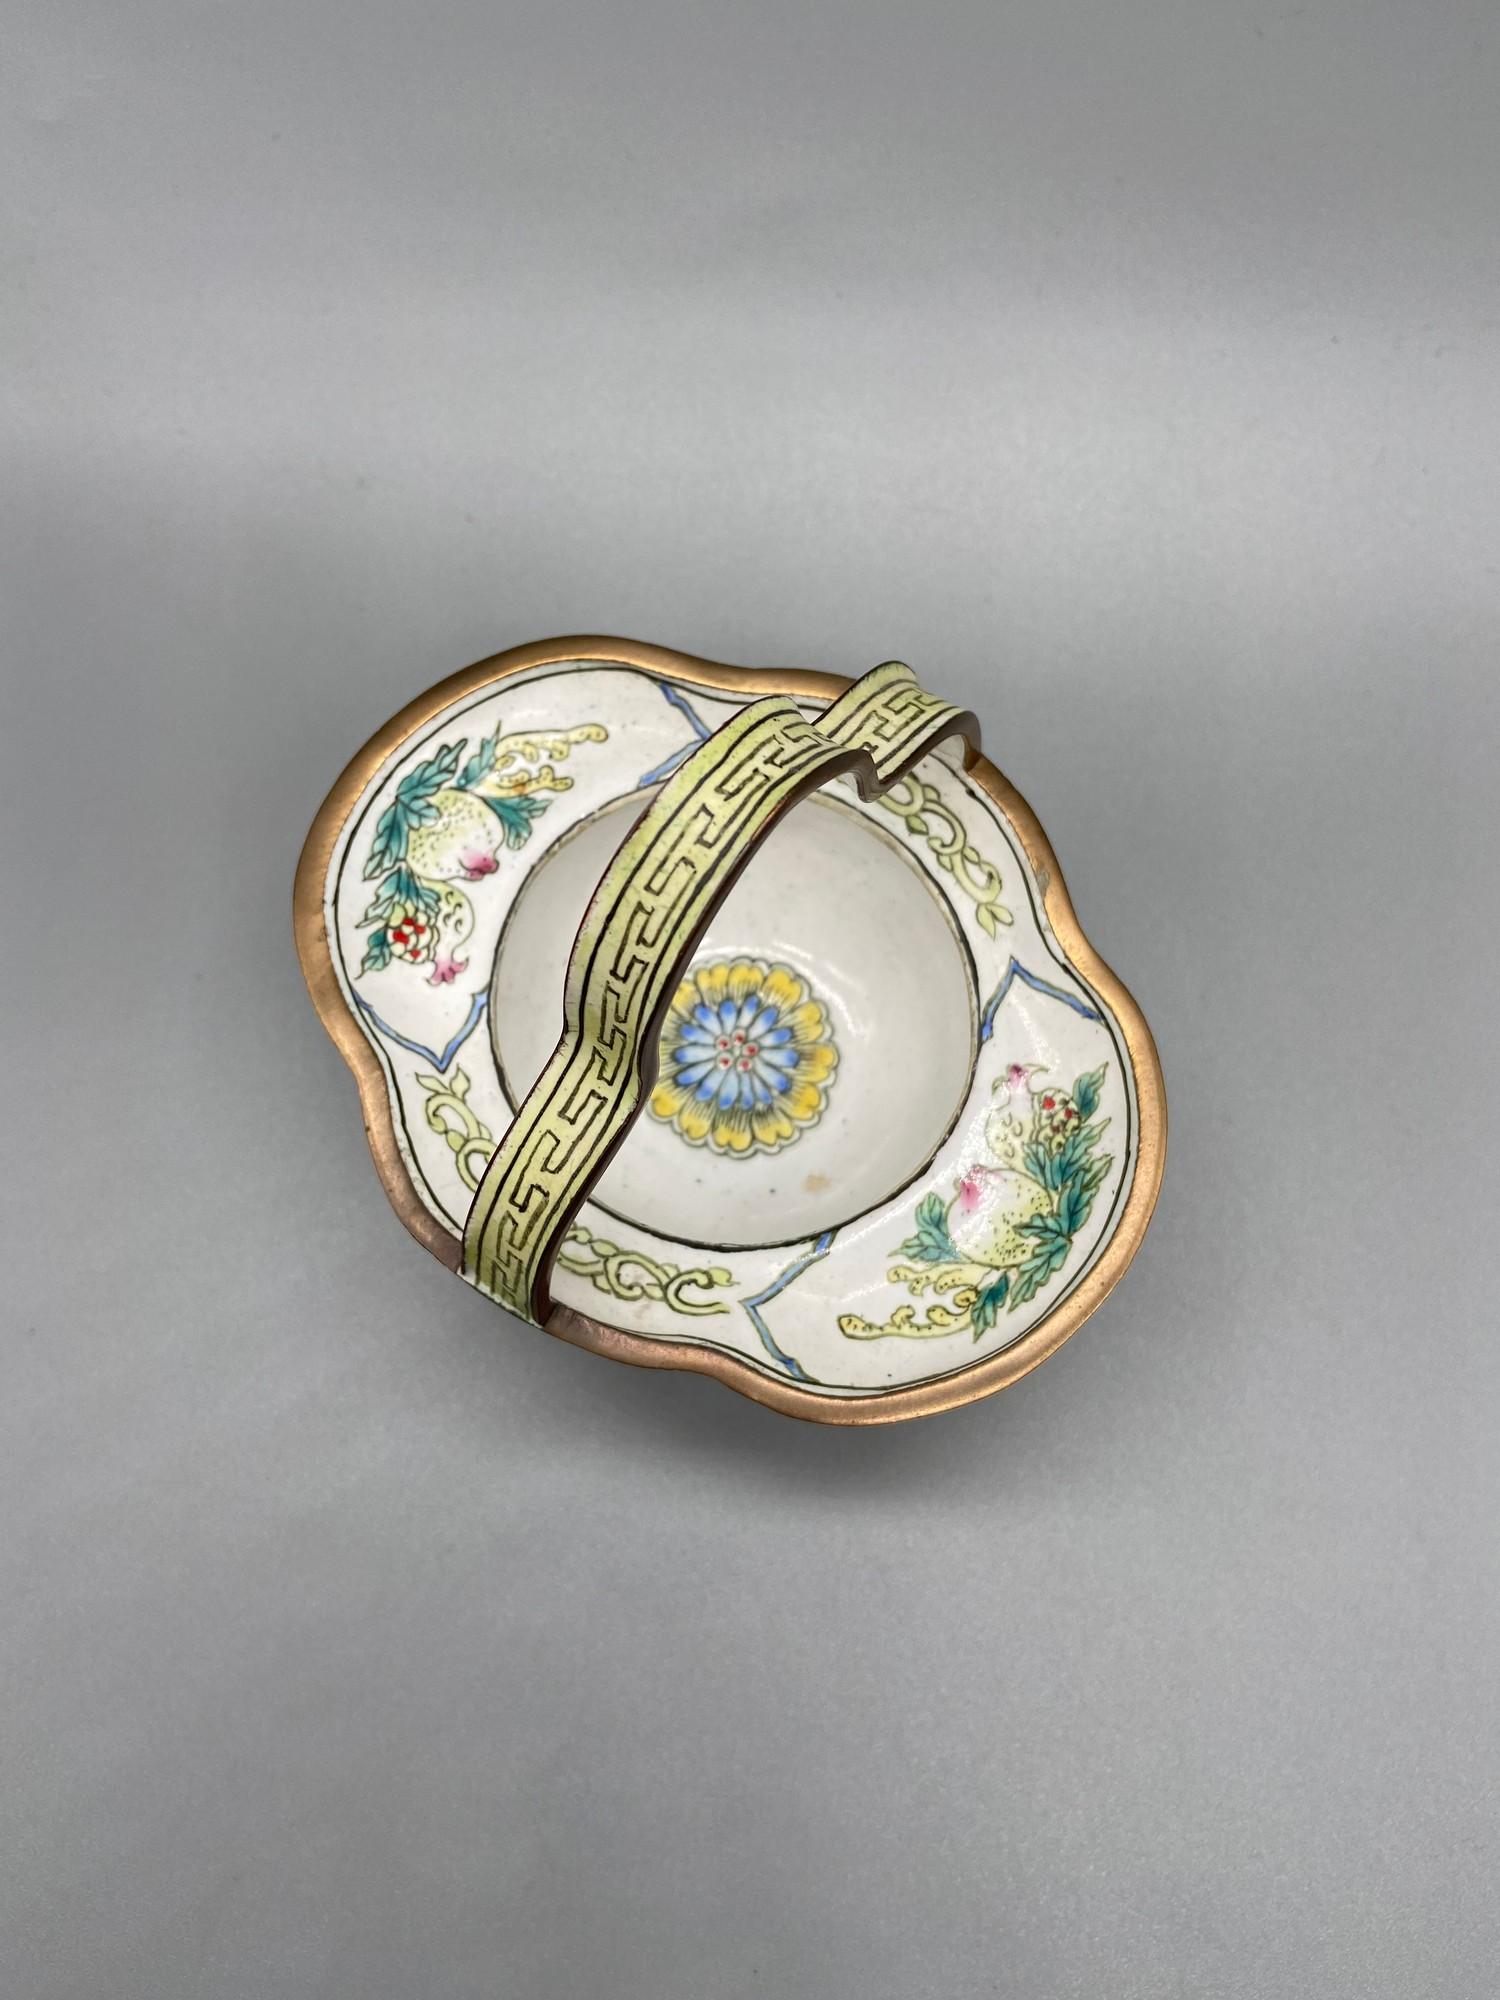 A 19th century Chinese hand painted enamel on copper basket. Designed with various foliage and - Image 2 of 5